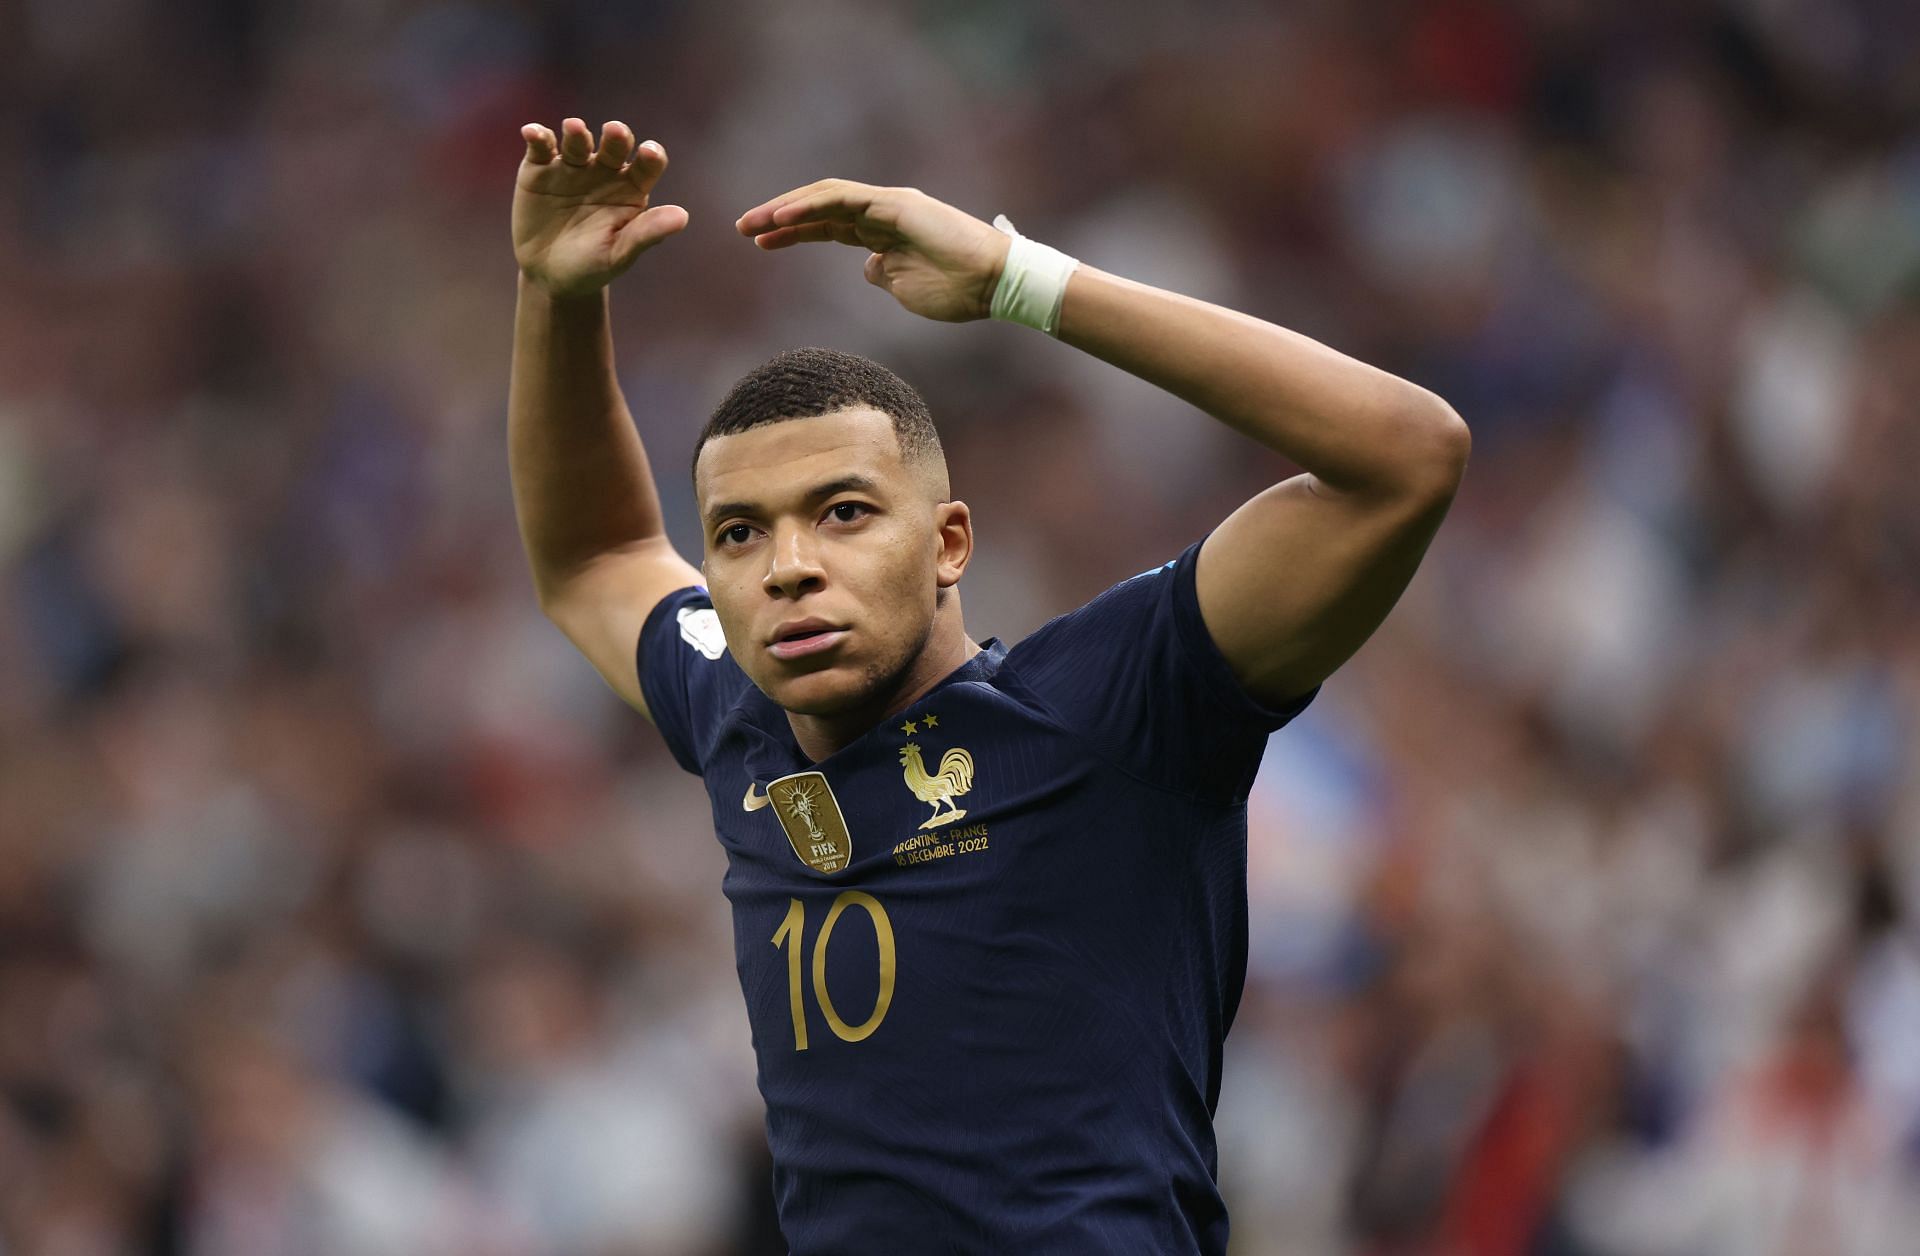 Kylian Mbappe has plenty of FIFA World Cup appearances still to come, but already holds a coveted record